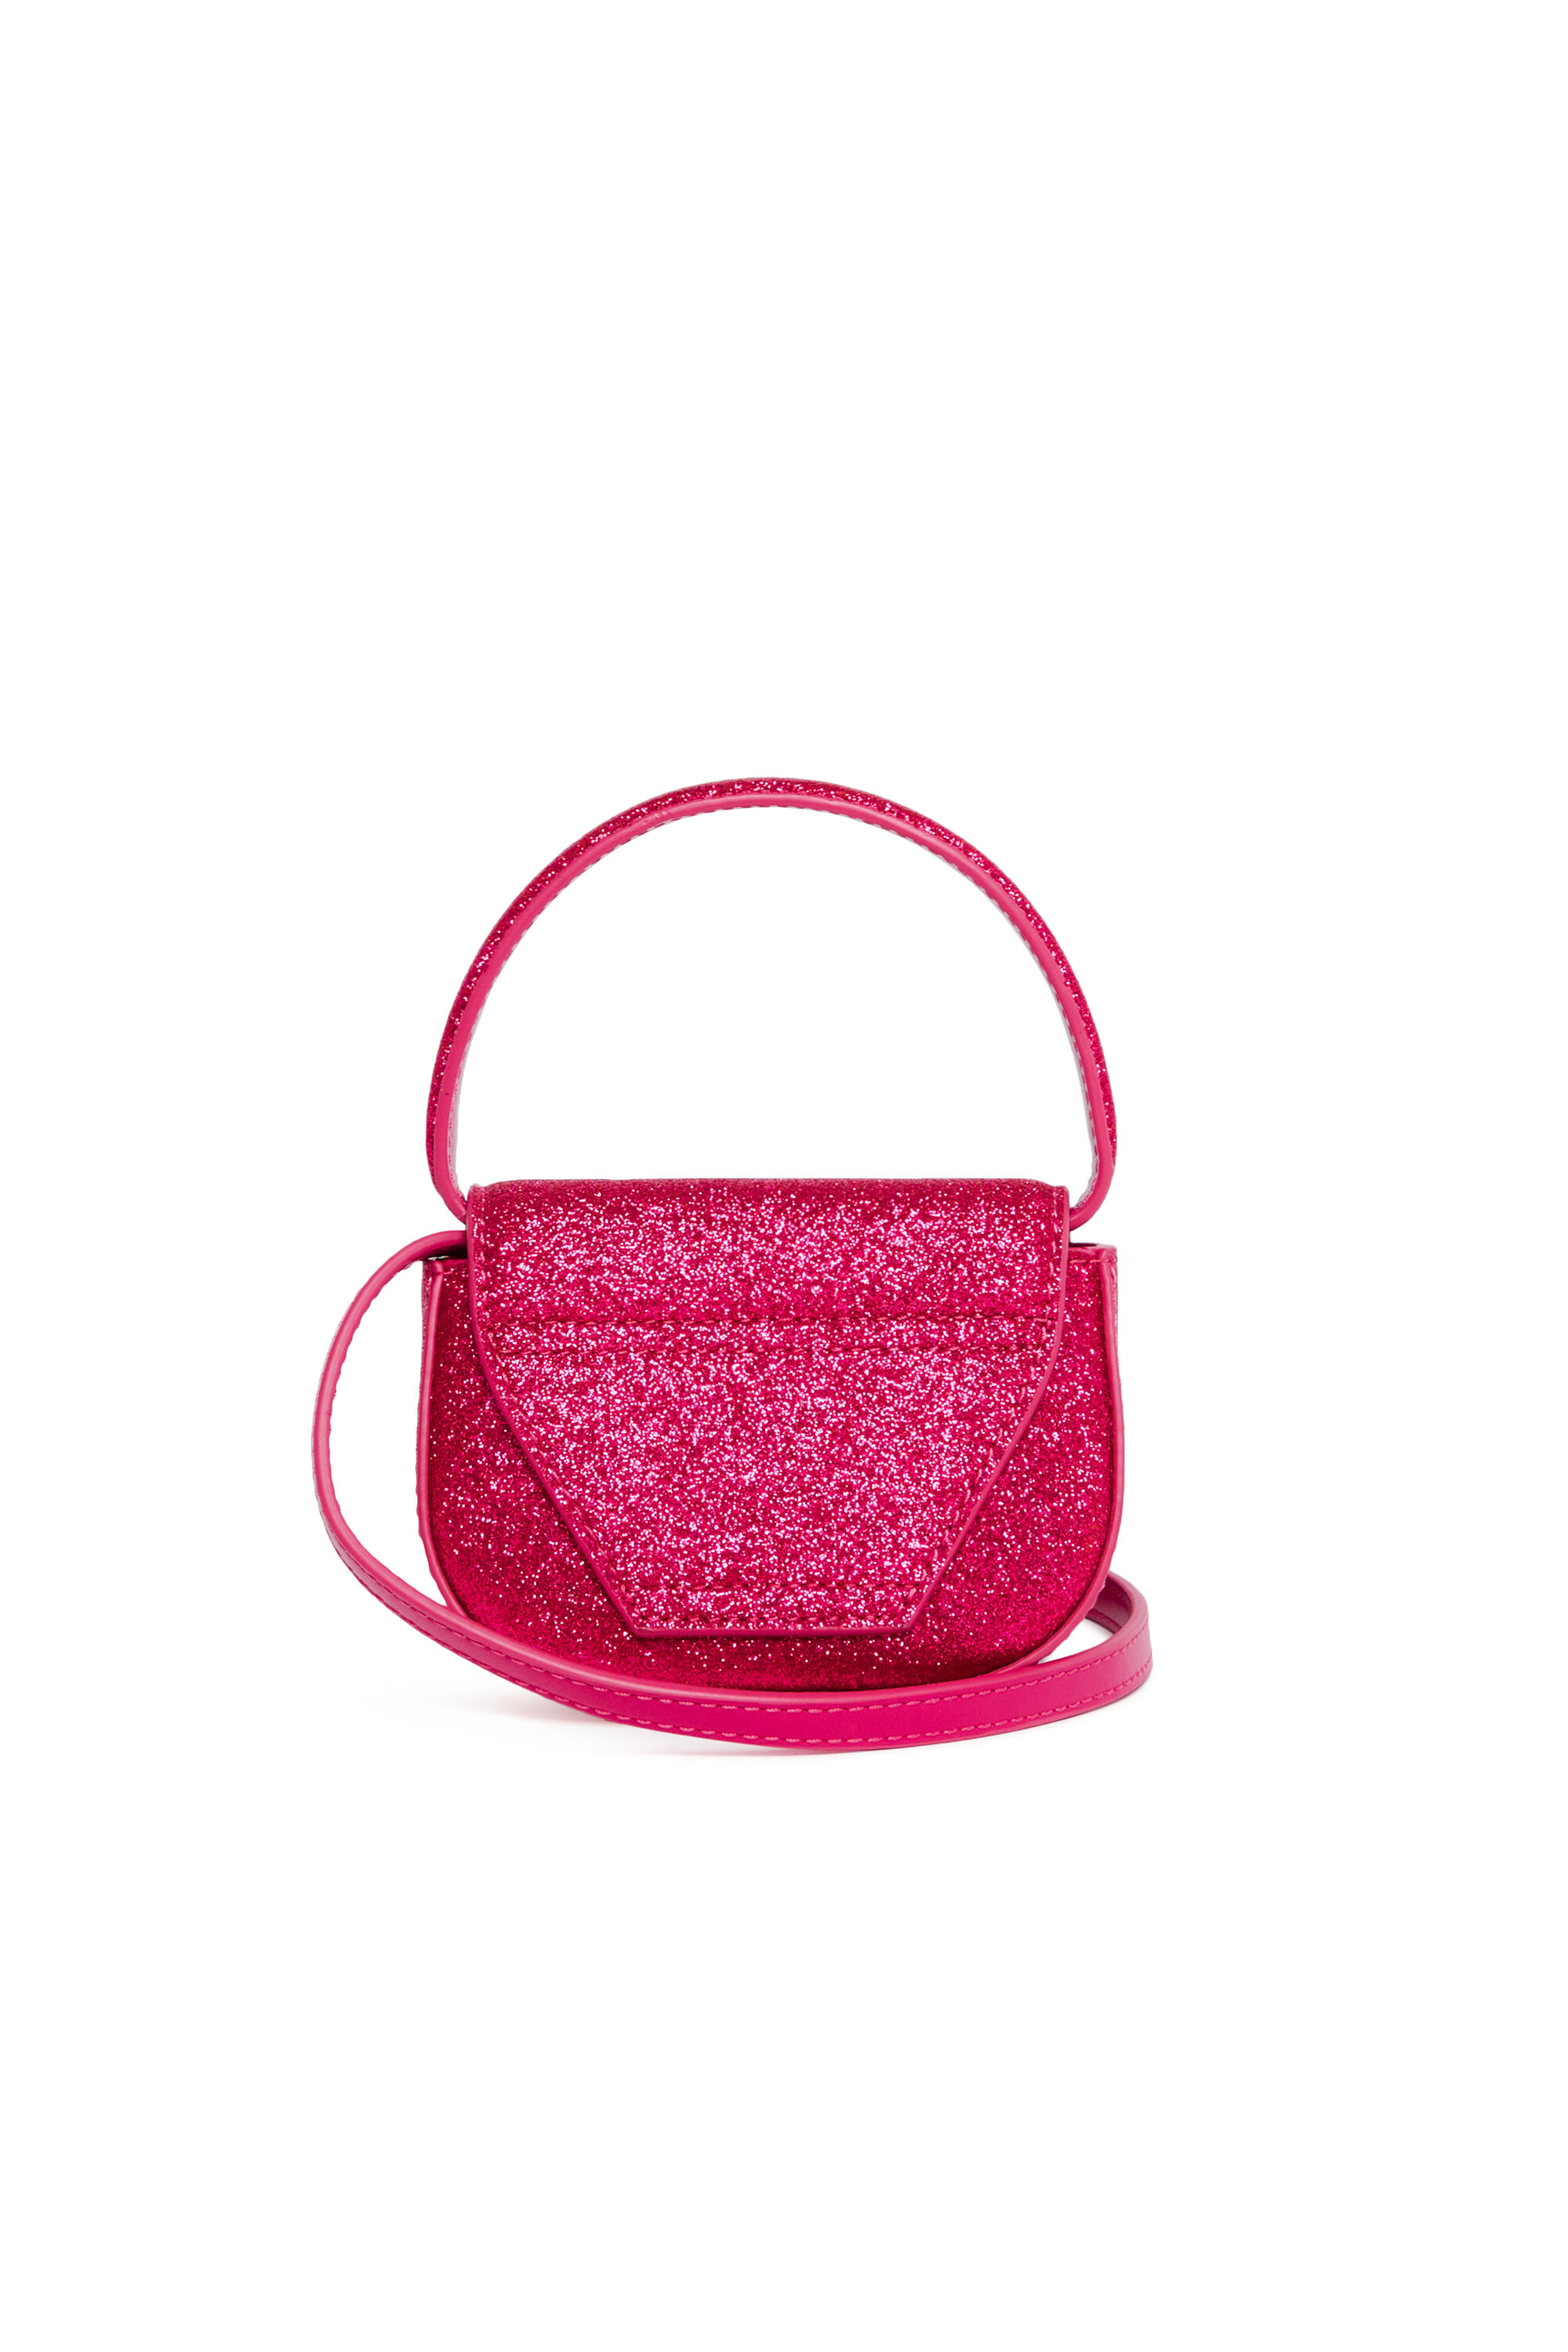 Diesel - 1DR XS, Woman Iconic mini bag in glitter fabric in Pink - Image 2